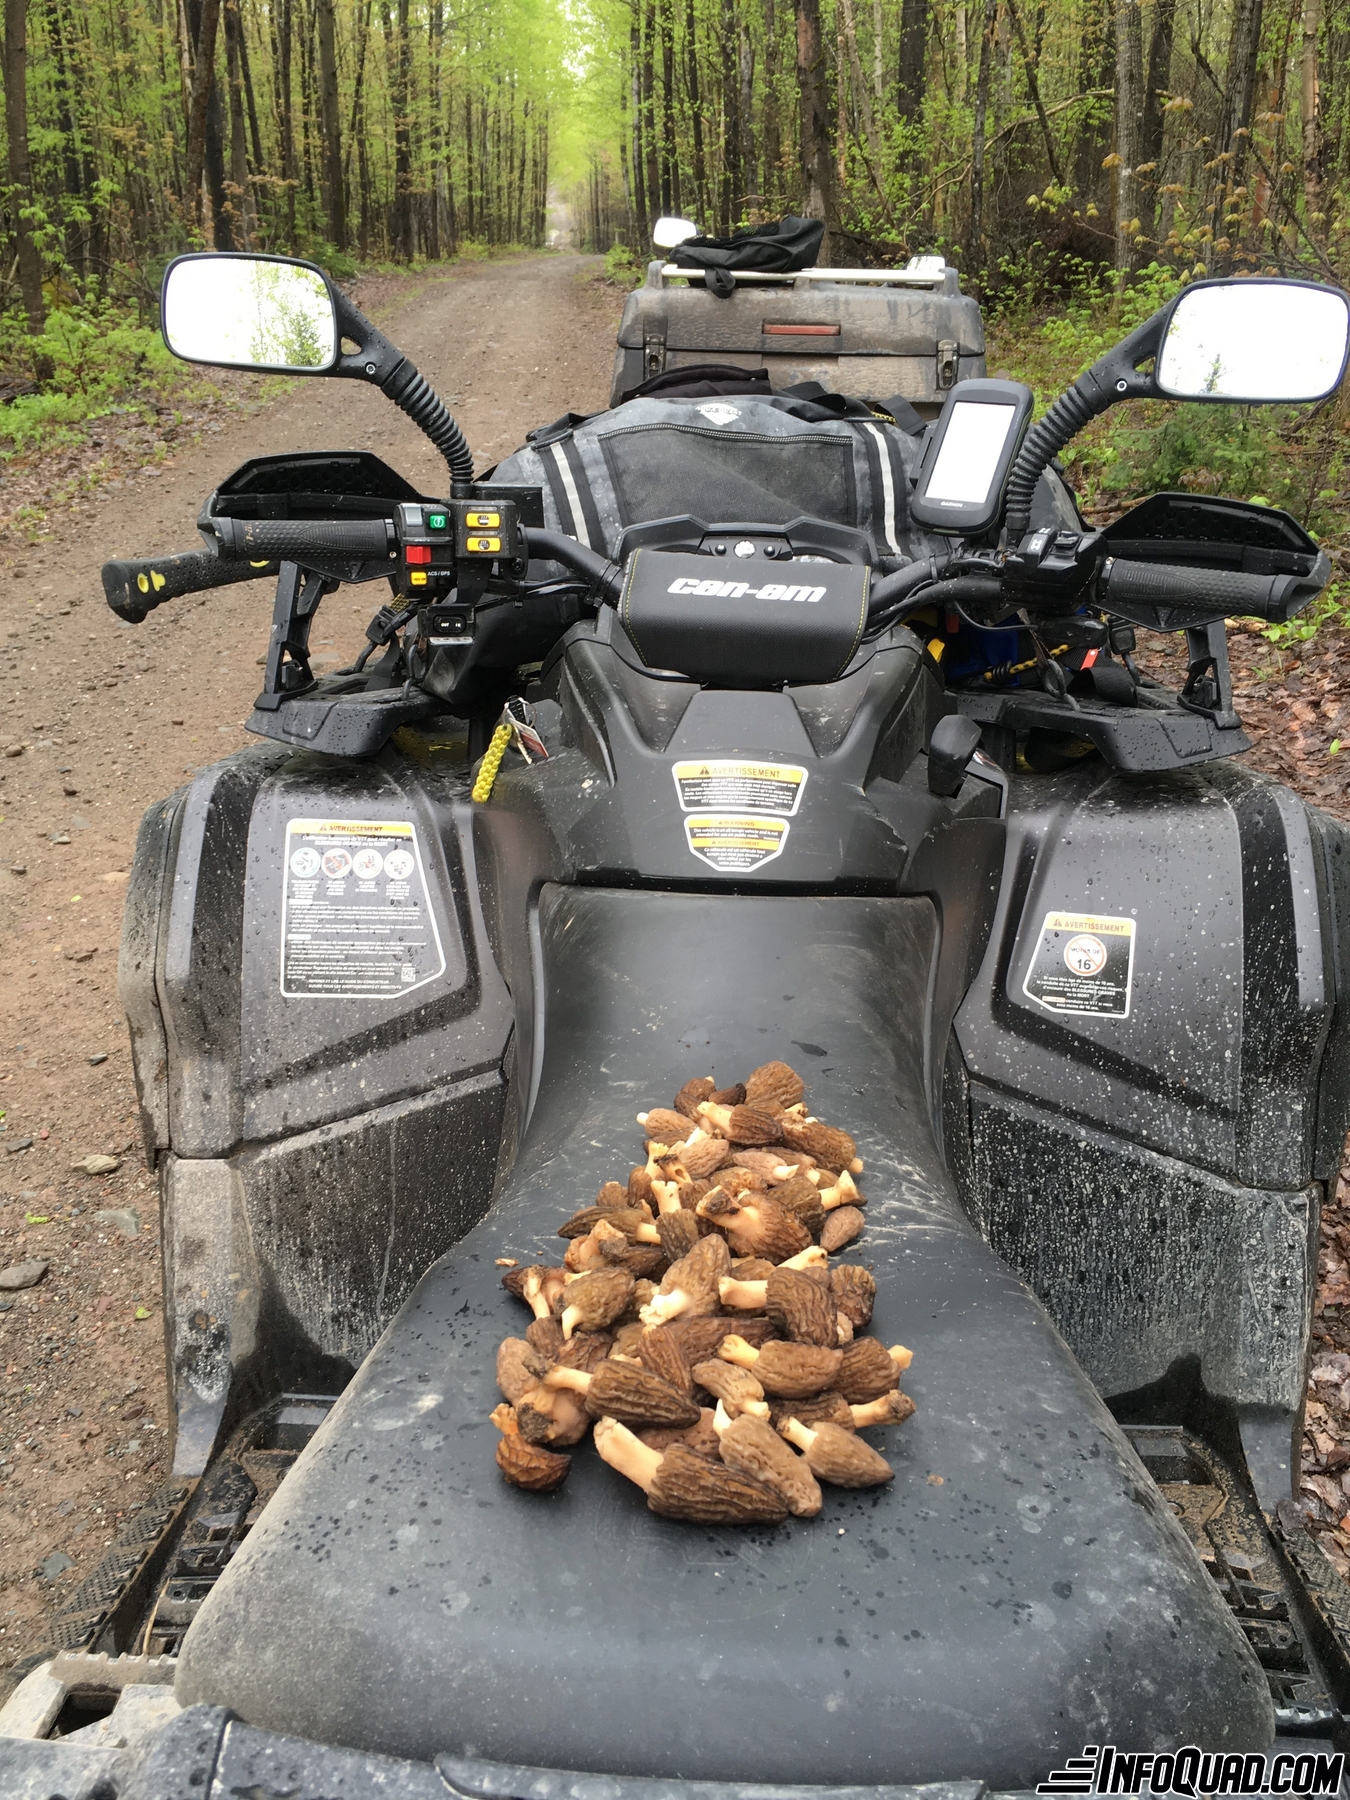 Taste the pleasures of the Quad: mycology on the trail